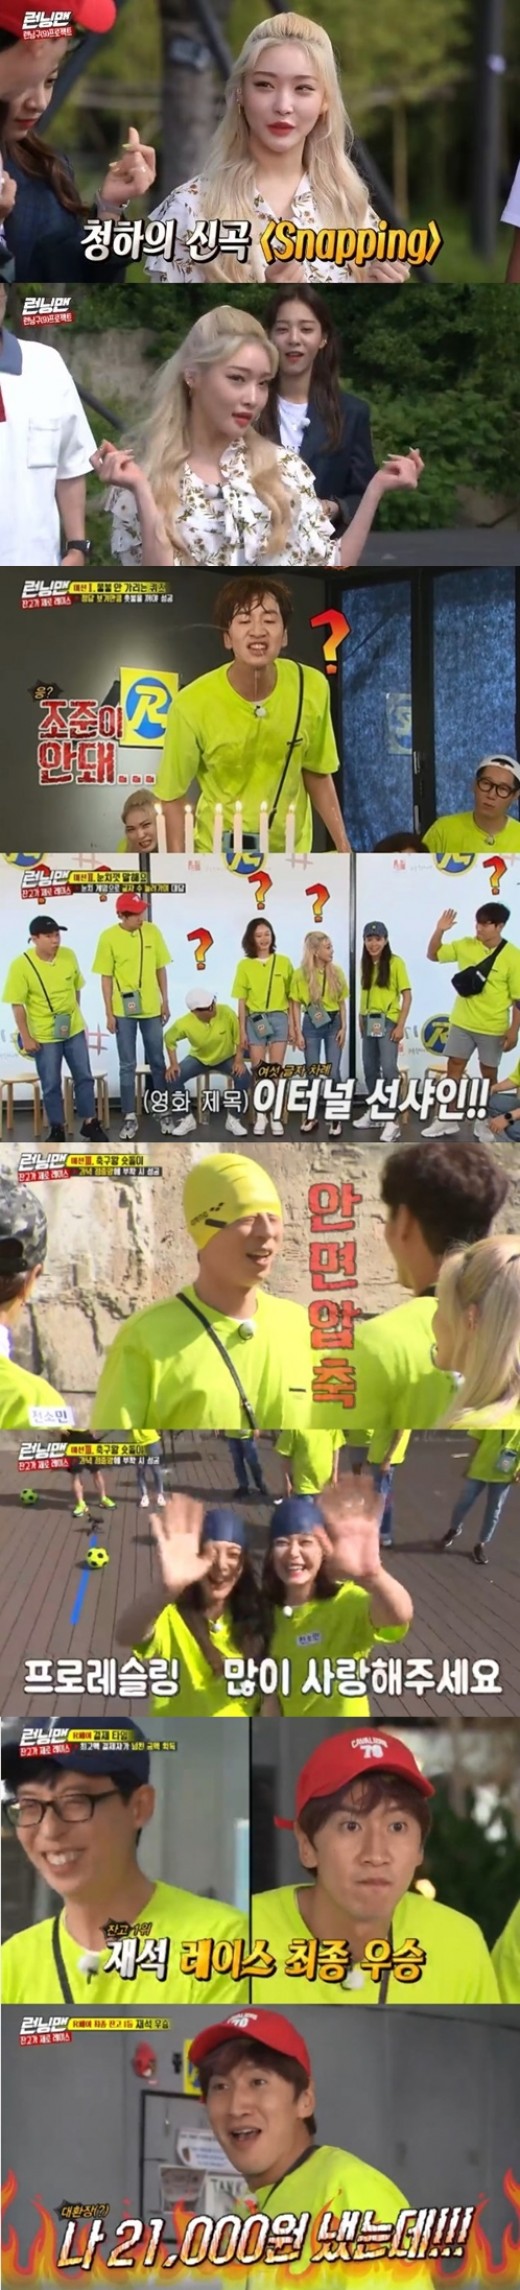 SBS Running Man kept the top spot in the same time zone of 2049 target audience rating.According to Nielsen Korea, the ratings agency, Running Man, which aired on the 16th, soared to the highest audience rating of 8% per minute, and the 2049 target audience rating, an important indicator of major advertising officials, recorded 4.1% (based on the second part of the audience rating of households in the Seoul Capital Area), ranking first in the same time zone, surpassing Masked Wang and Donkey Ears.The average audience rating was 5.1% in the first part and 7% in the second part (based on the audience rating of households in the Seoul Capital Area).The show was decorated with Zero Race in balance and was accompanied by Best Friend singer Cheongha and actor Seol In-ah as guests. In this race, the members were paid a mission phone with 30,000 won each.As you want to pay for food expenses by going around a restaurant, you should pay privately with R Pay. If the final amount is insufficient after payment, you should pay the shortest amount of money with the last person and the least person in each round mission.However, if the final amount is overflowing, the person who paid the highest amount will acquire all the difference.The members had a fierce sense of action from the beginning, especially in the last round, there was a penalty to write a humiliation hat.With an unexpected big smile, each member laughed with an extreme sense of fighting as the payment order came to an end, and the scene won the Best One Minute with the highest audience rating of 8% per minute.On the other hand, Seol In-ah was punished for water bombs with a large payment every round, and Lee Kwang-soo made a strategy to all-in-one on the last mission, but he was hit by a water bomb, pushed by Yoo Jae-Suk, who had more than 1,000 won in assets even though it was the same strategy.Ji Seok-jin was named as a companion penalty of Seol In-ah, and he was punished with Seol In-ah and Lee Kwang-soo, and Yoo Jae-Suk became the final winner.In addition, Cheongha and Seol In-ah have been performing a joint stage of 12 oclock already as best friends, and Cheongha has also released a new song Snapping for the first time to collect topics.